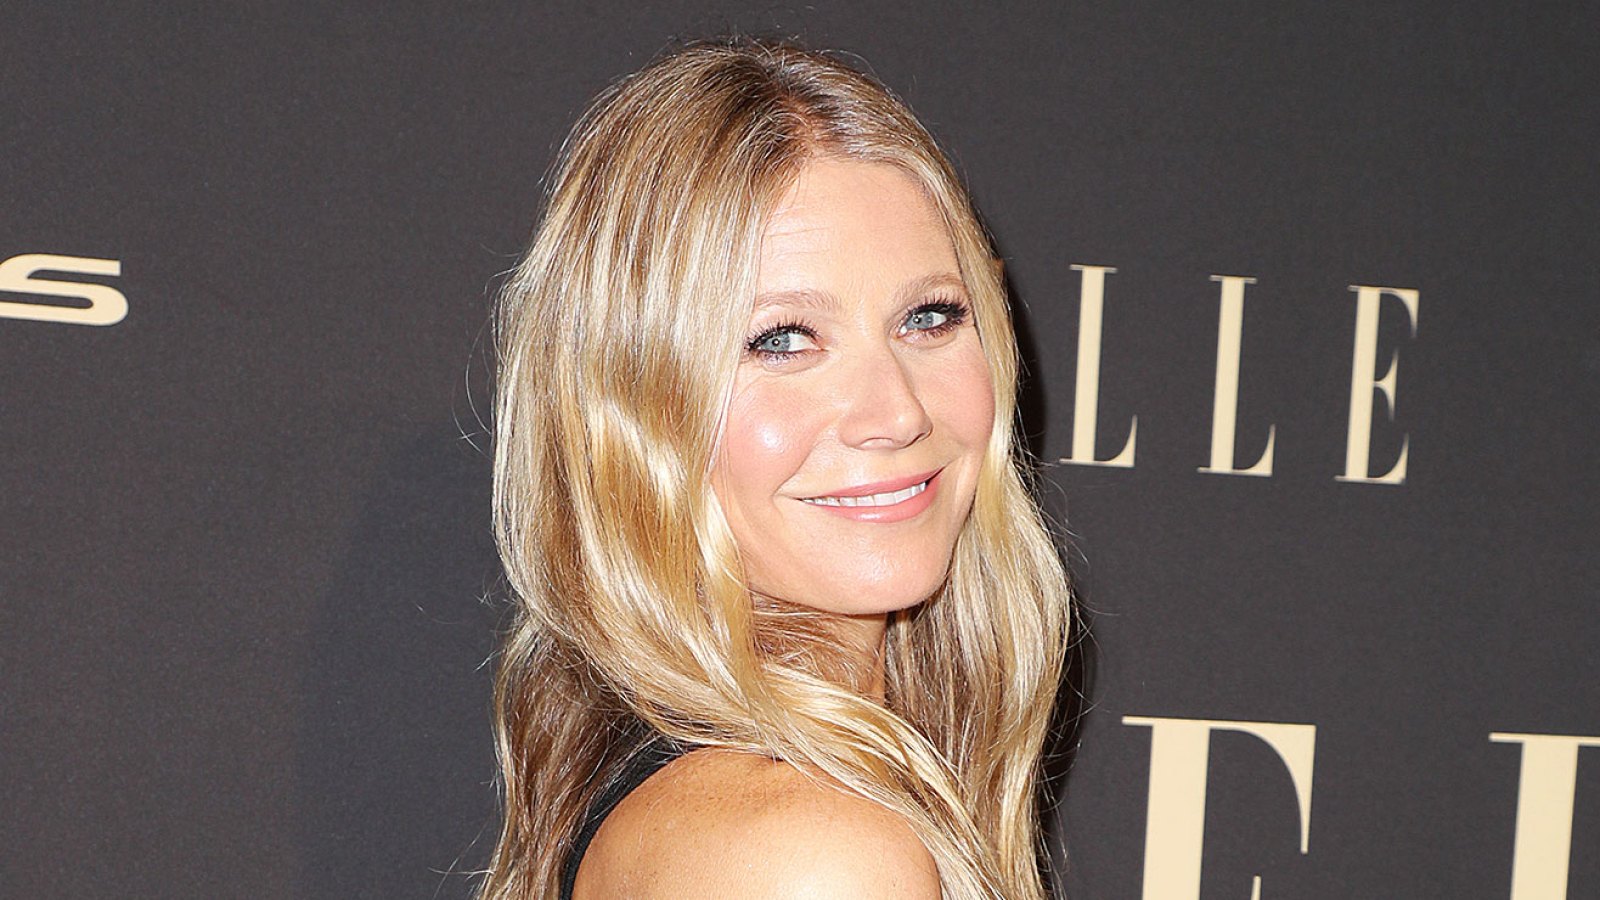 Gwyneth Paltrow Goes to Her Farmers Market Wearing a Mask and Gloves